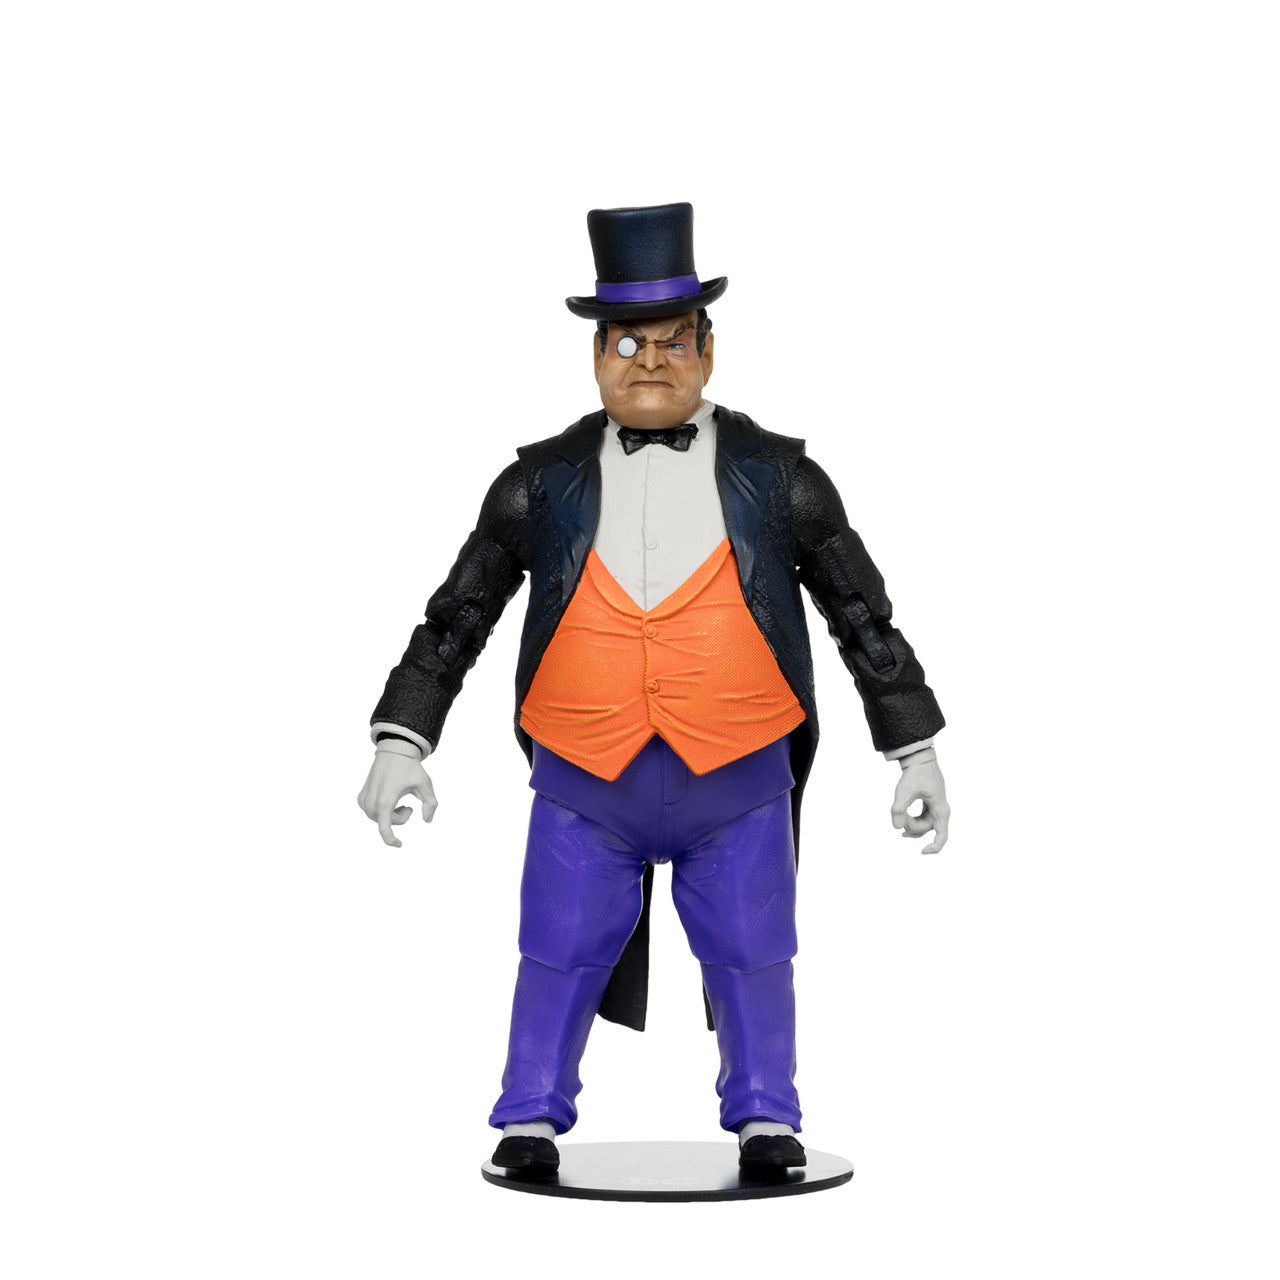 The Penguin (DC Classic) McFarlane Collector Edition 7" Action Figure